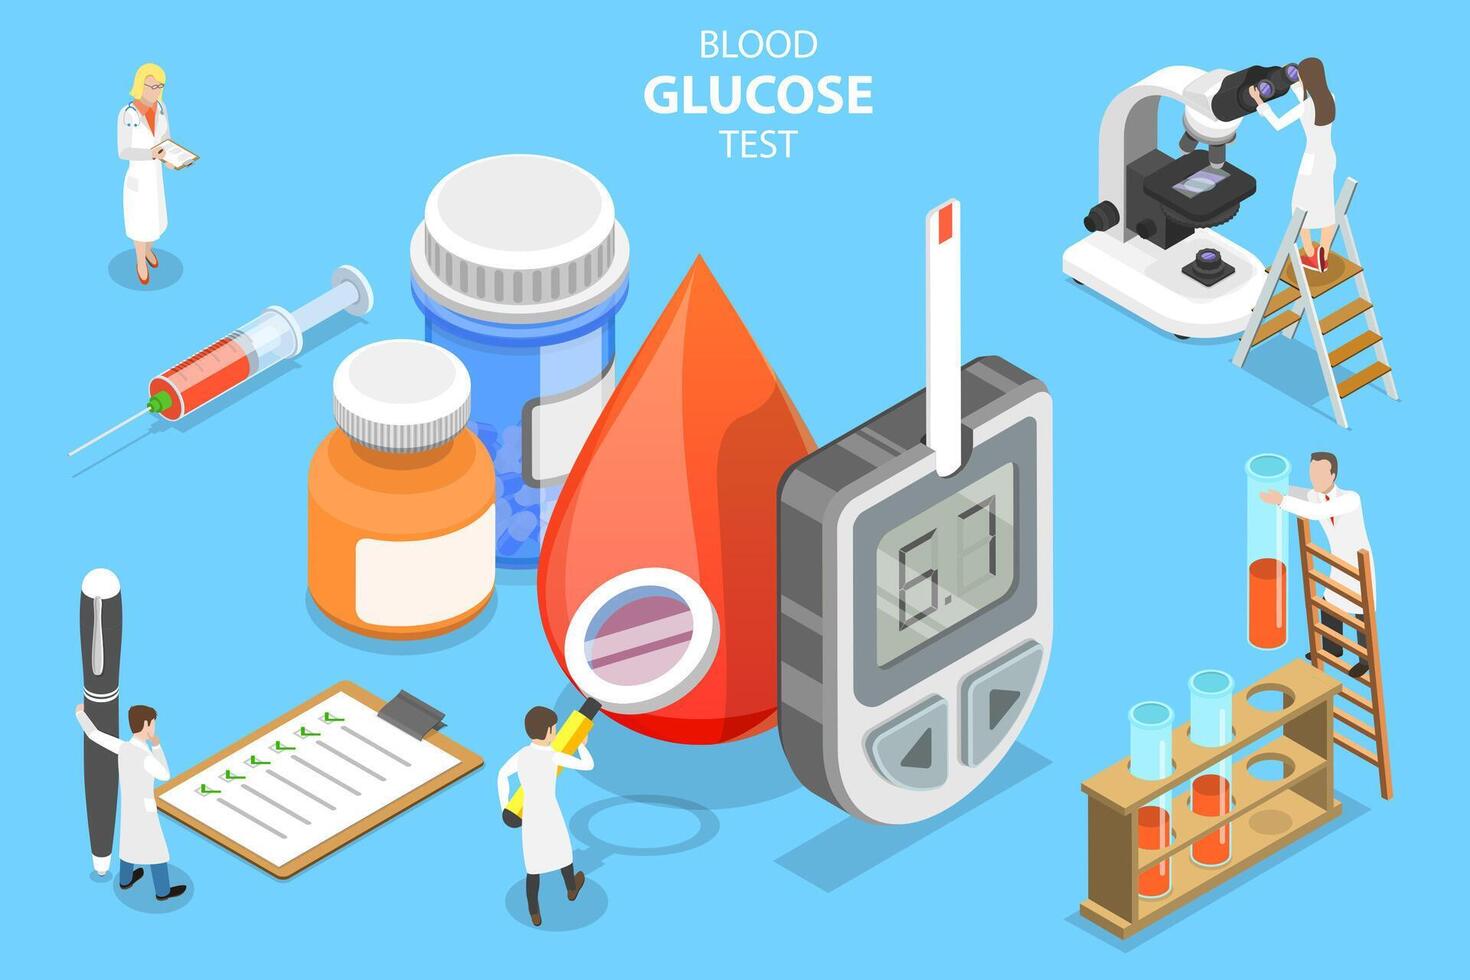 3D Isometric Flat Concept of Blood Glucose Testing, Glucometer Hand Test. vector